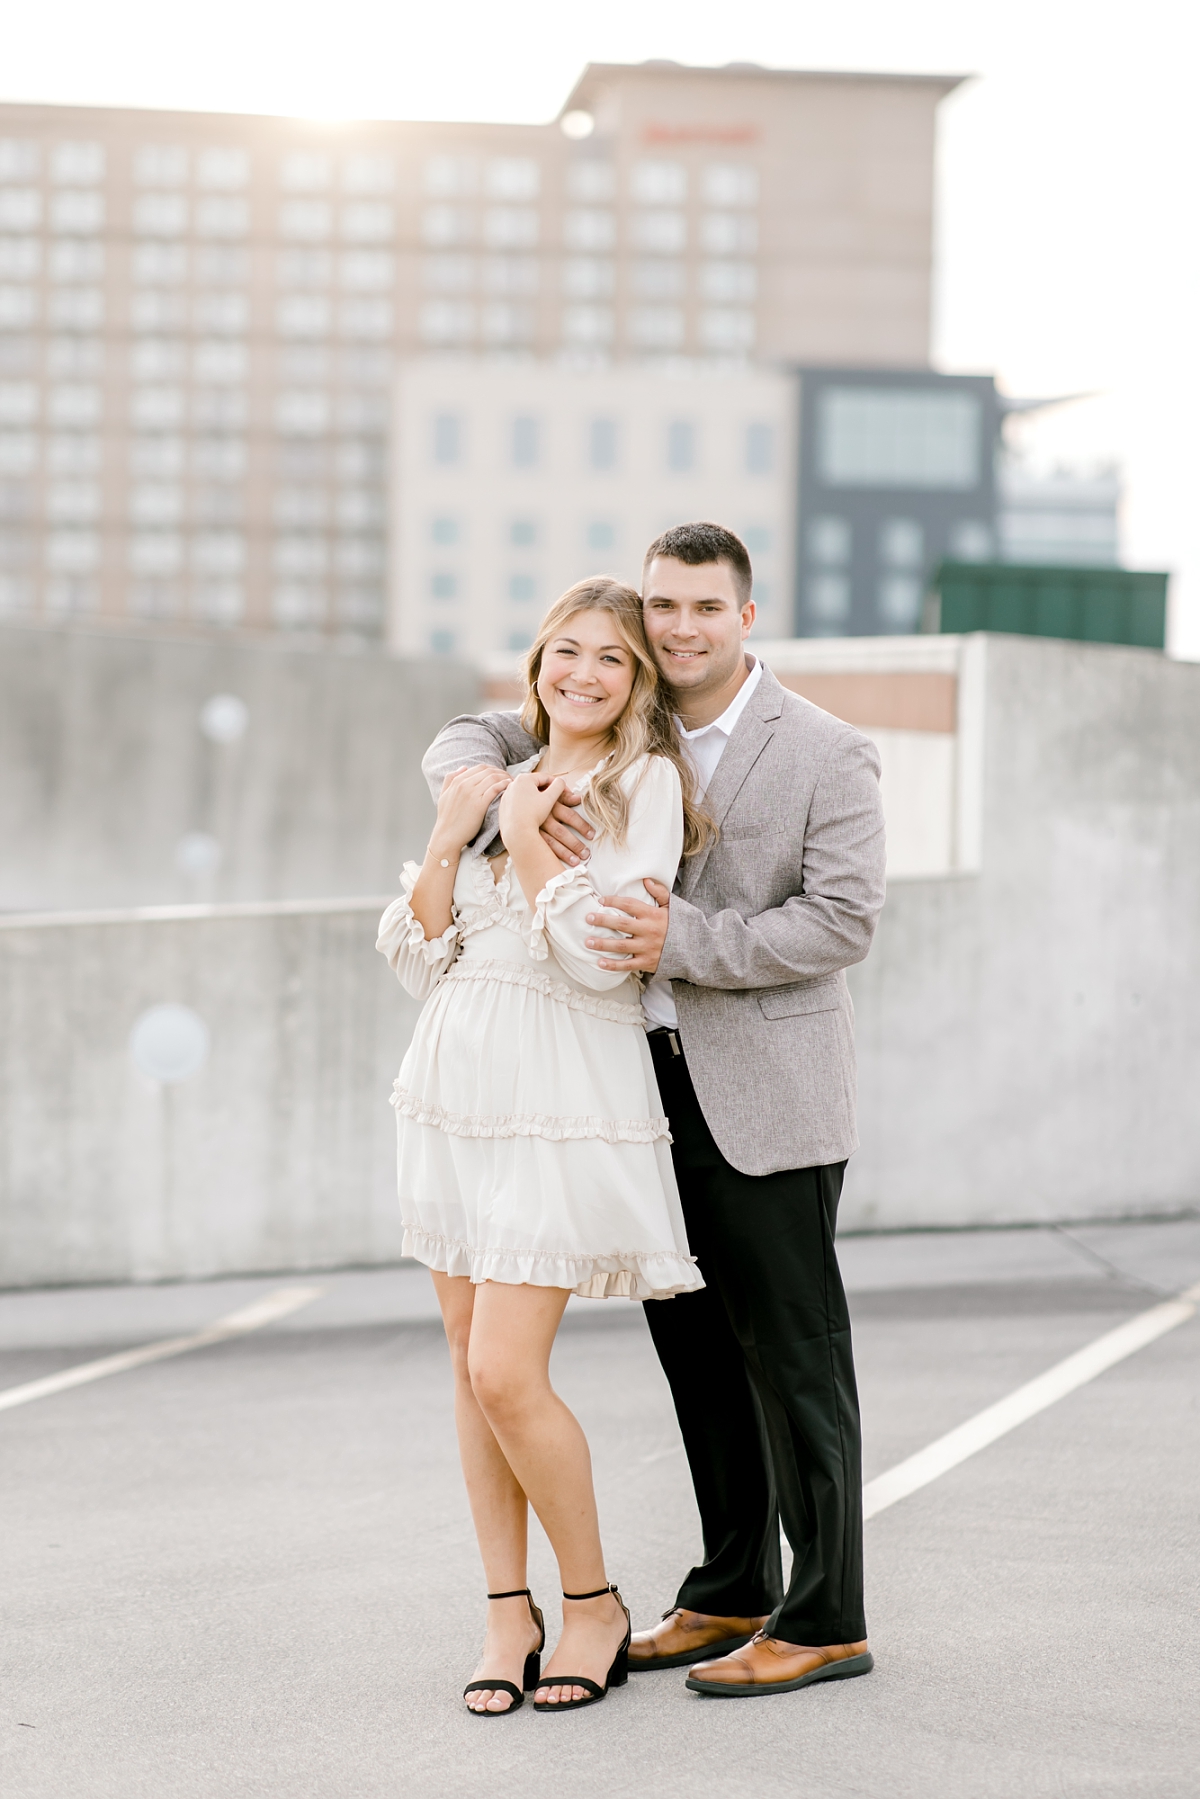 downtown lancaster engagement session photography photo_0019.jpg